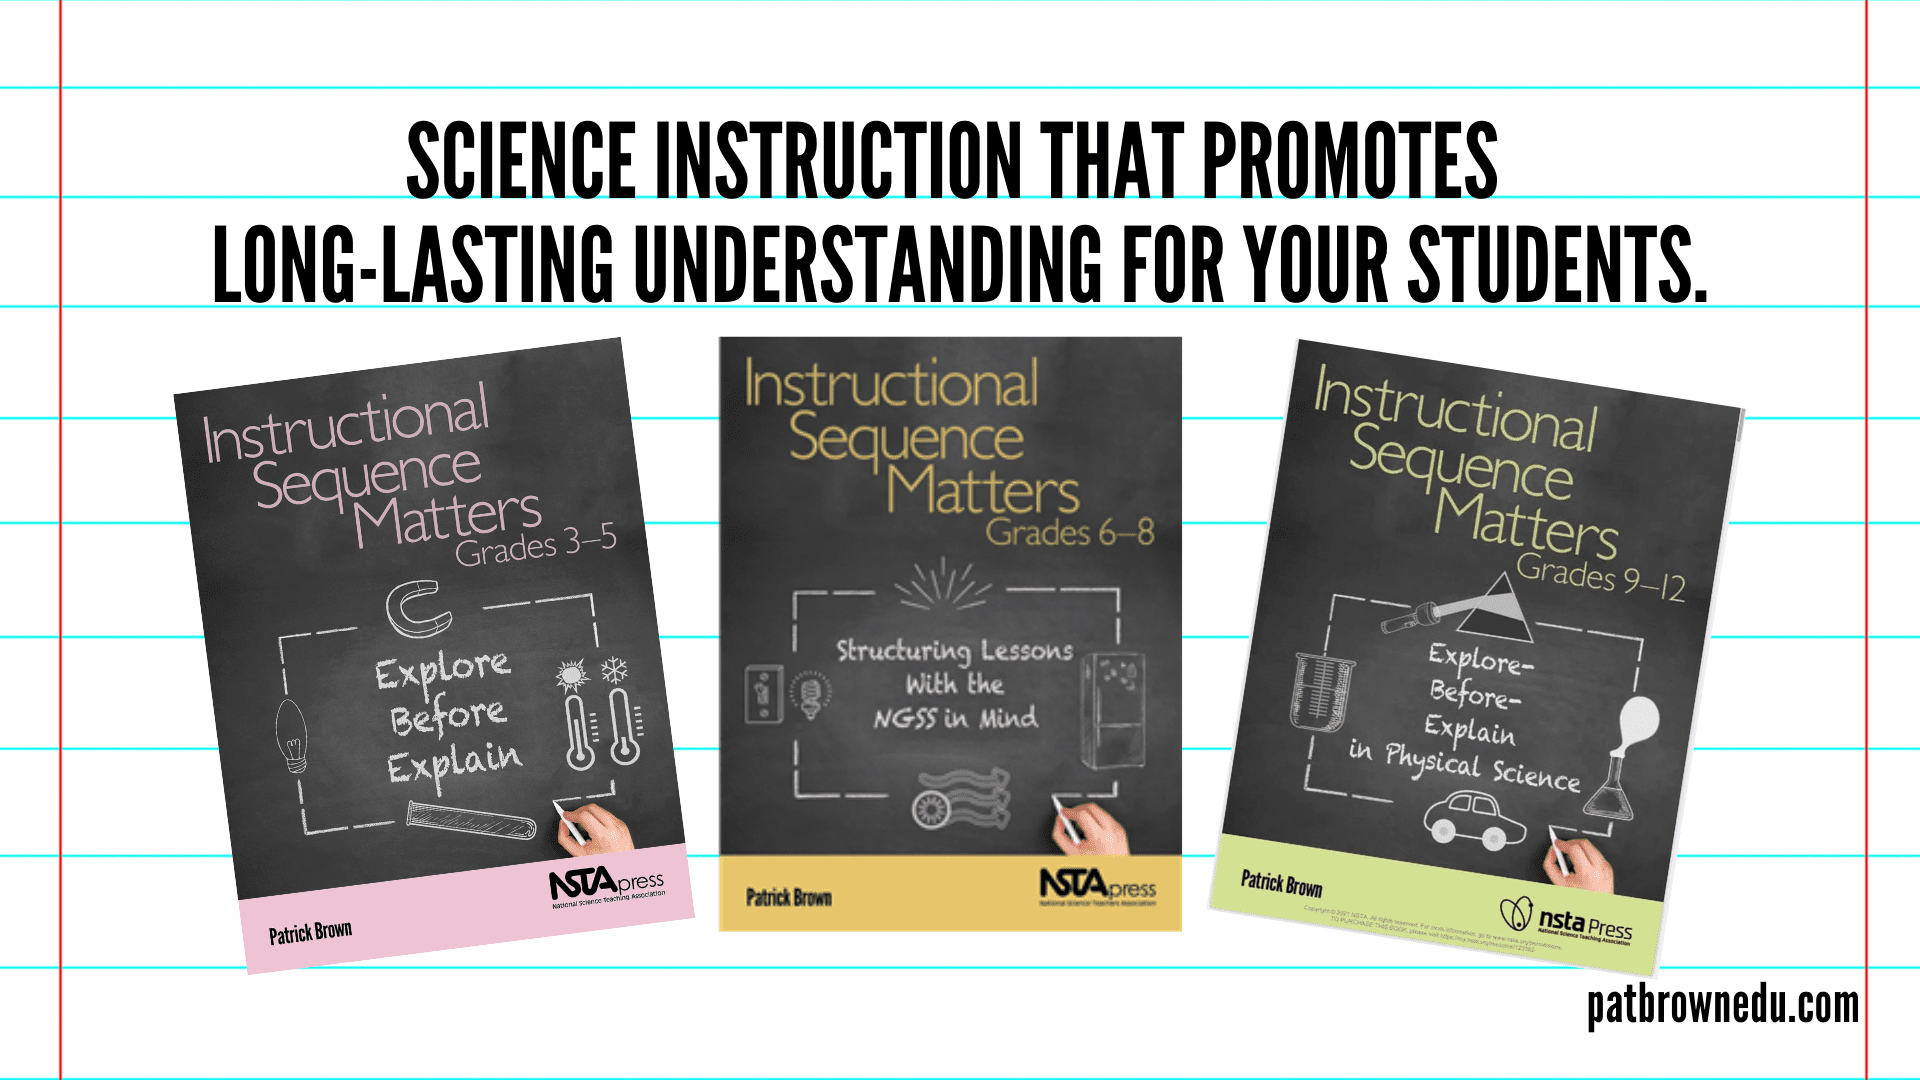 Science Instruction that promotes long-lasting understanding for your students